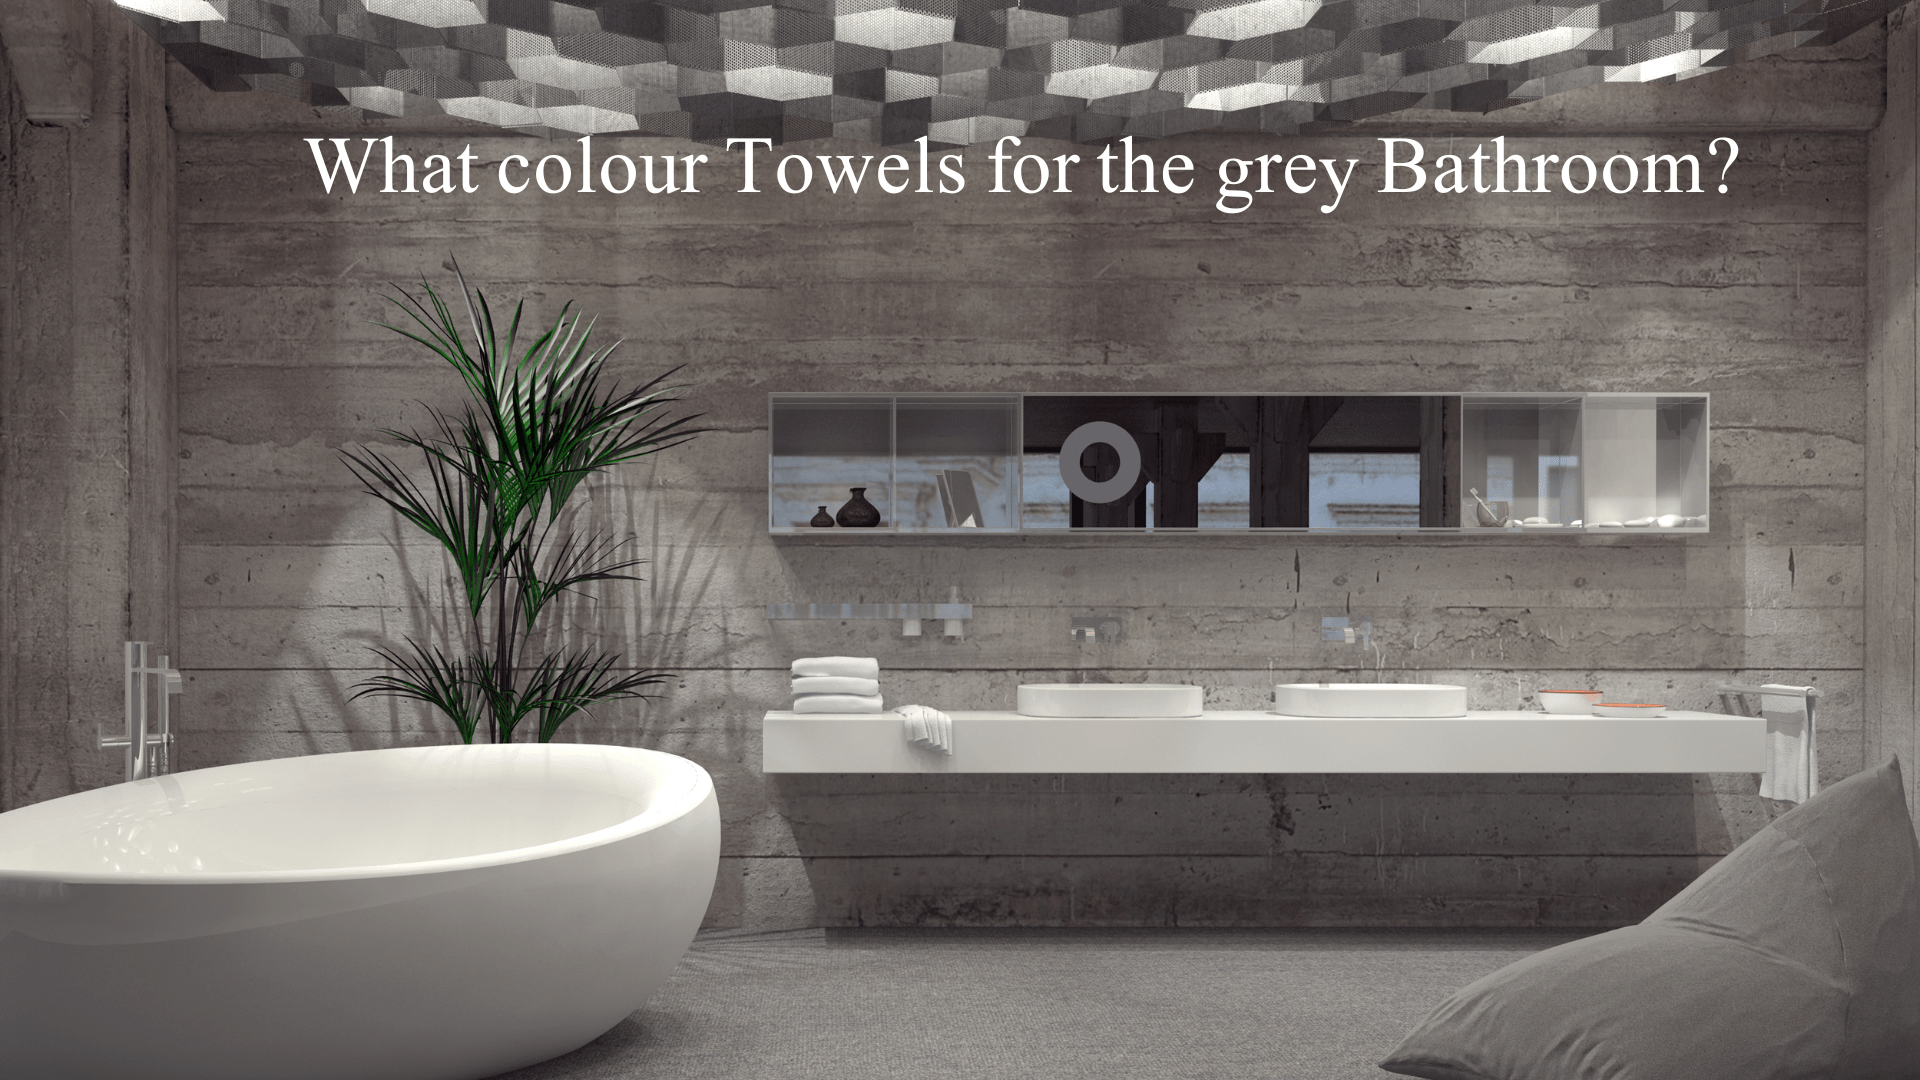 What Color Towels for Grey Bathroom.In this article, we’ll delve into the world of bathroom decor and answer, “What colour towels should you choose for a grey bathroom?